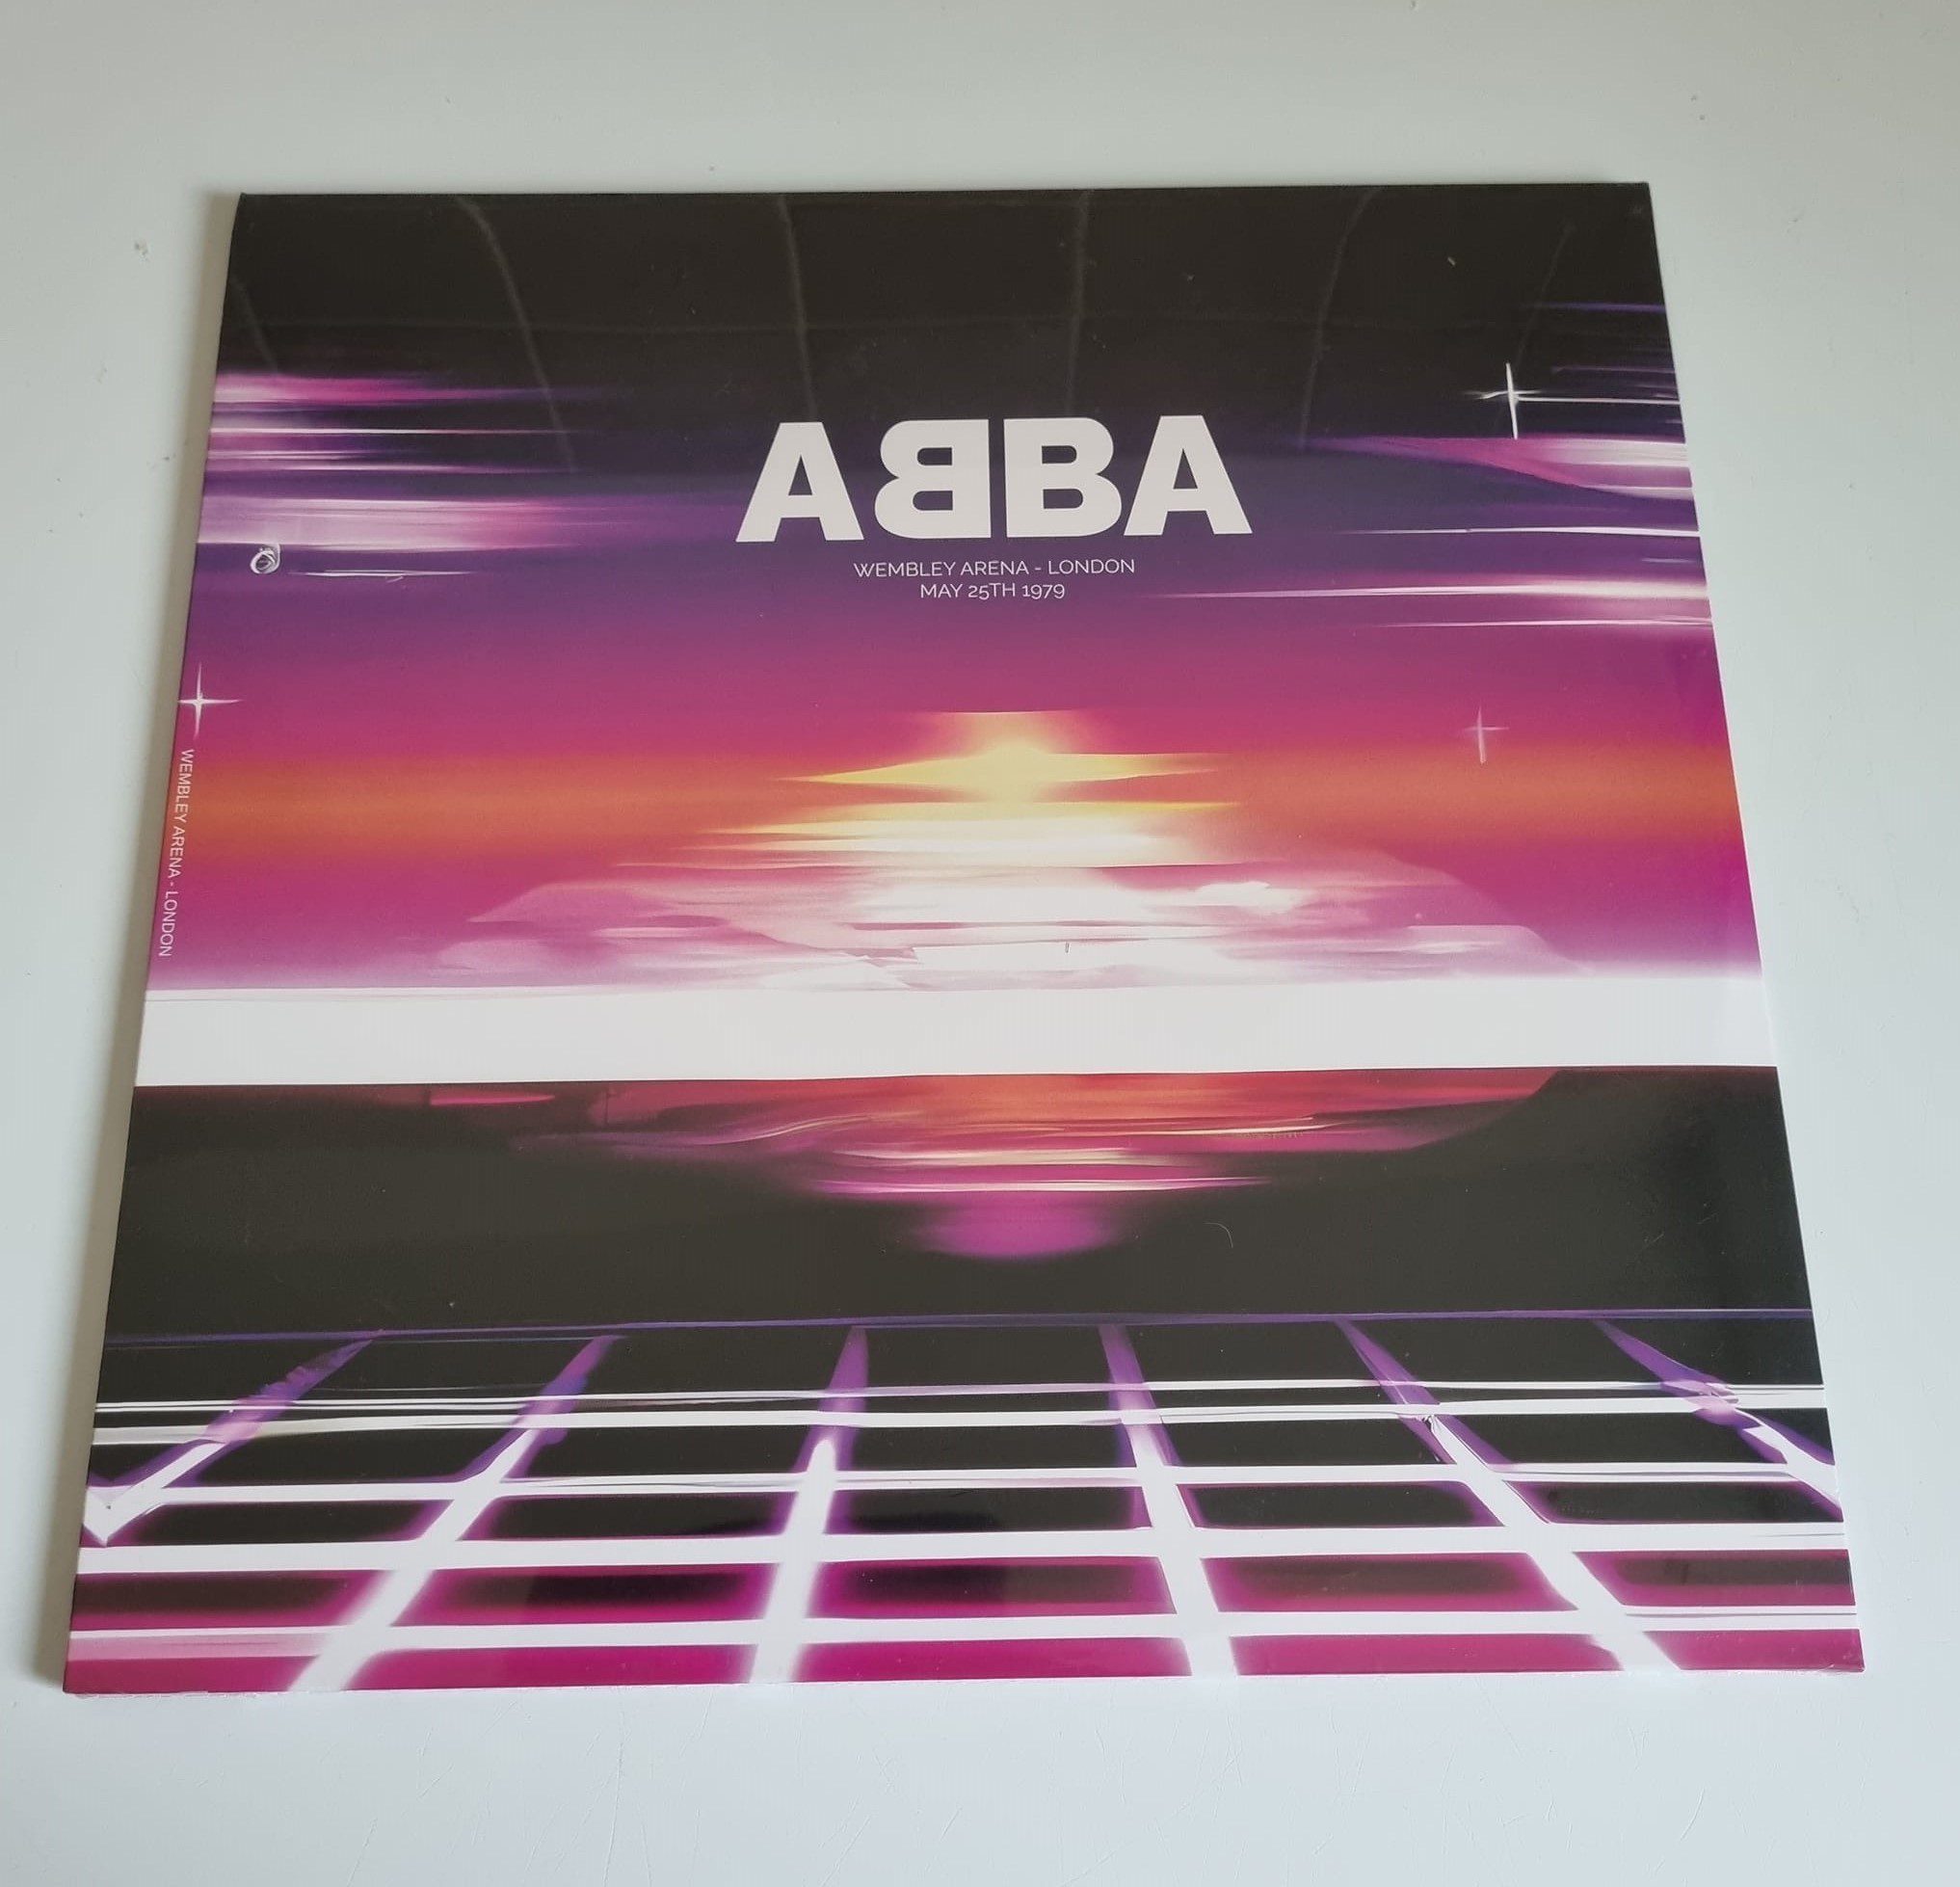 Buy this rare Abba record by clicking here